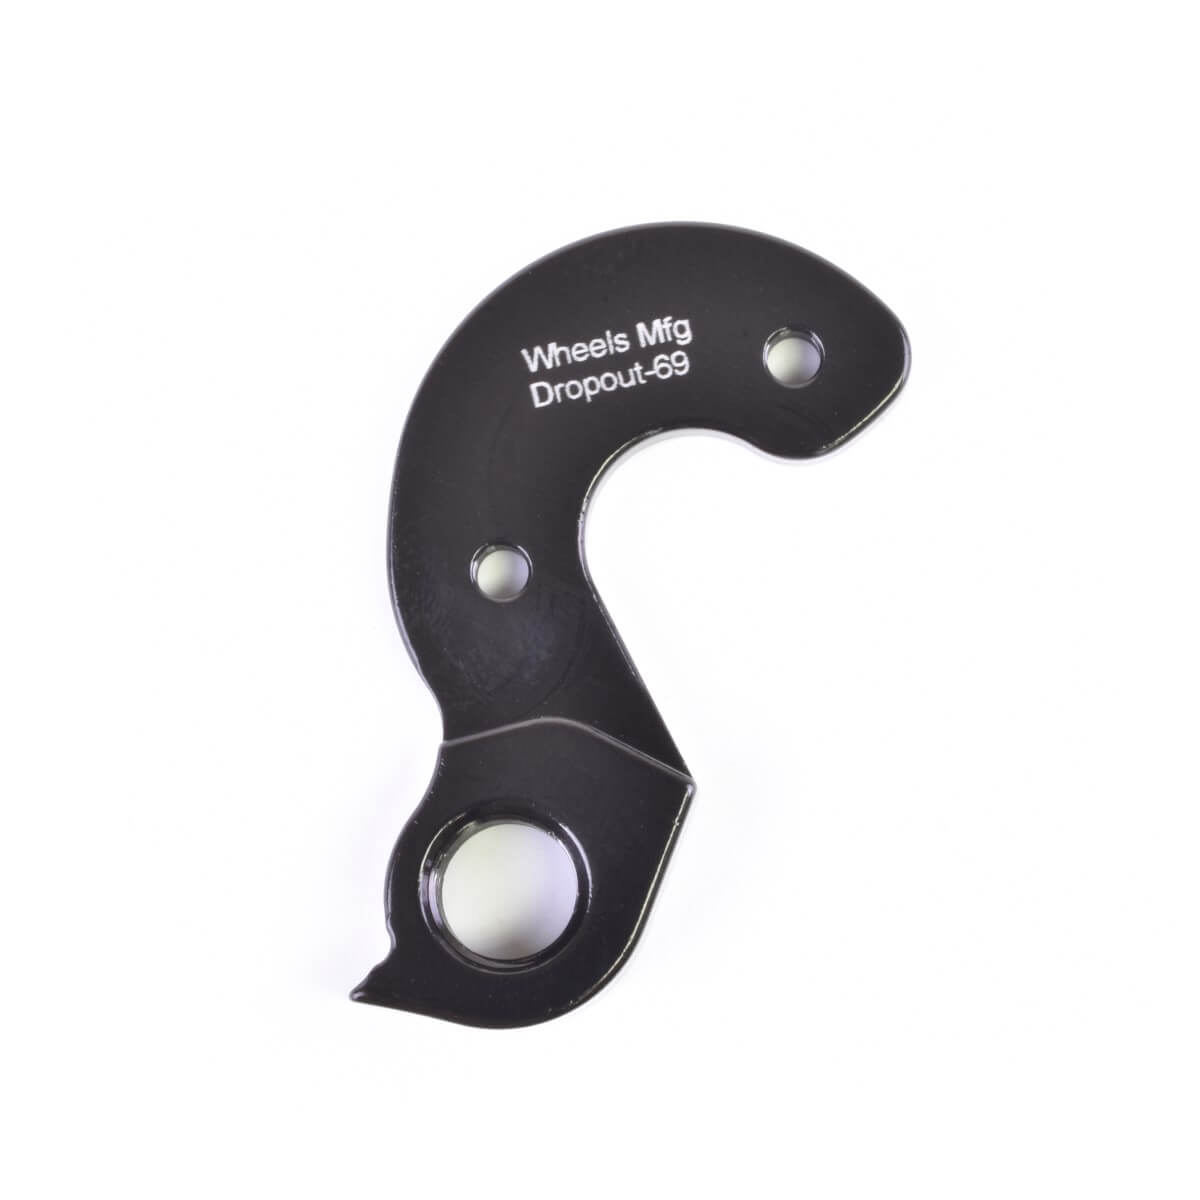 Rocky Mountain derailleur hanger for road bikes. Also: Merida models. | DROPOUT-69 Outside